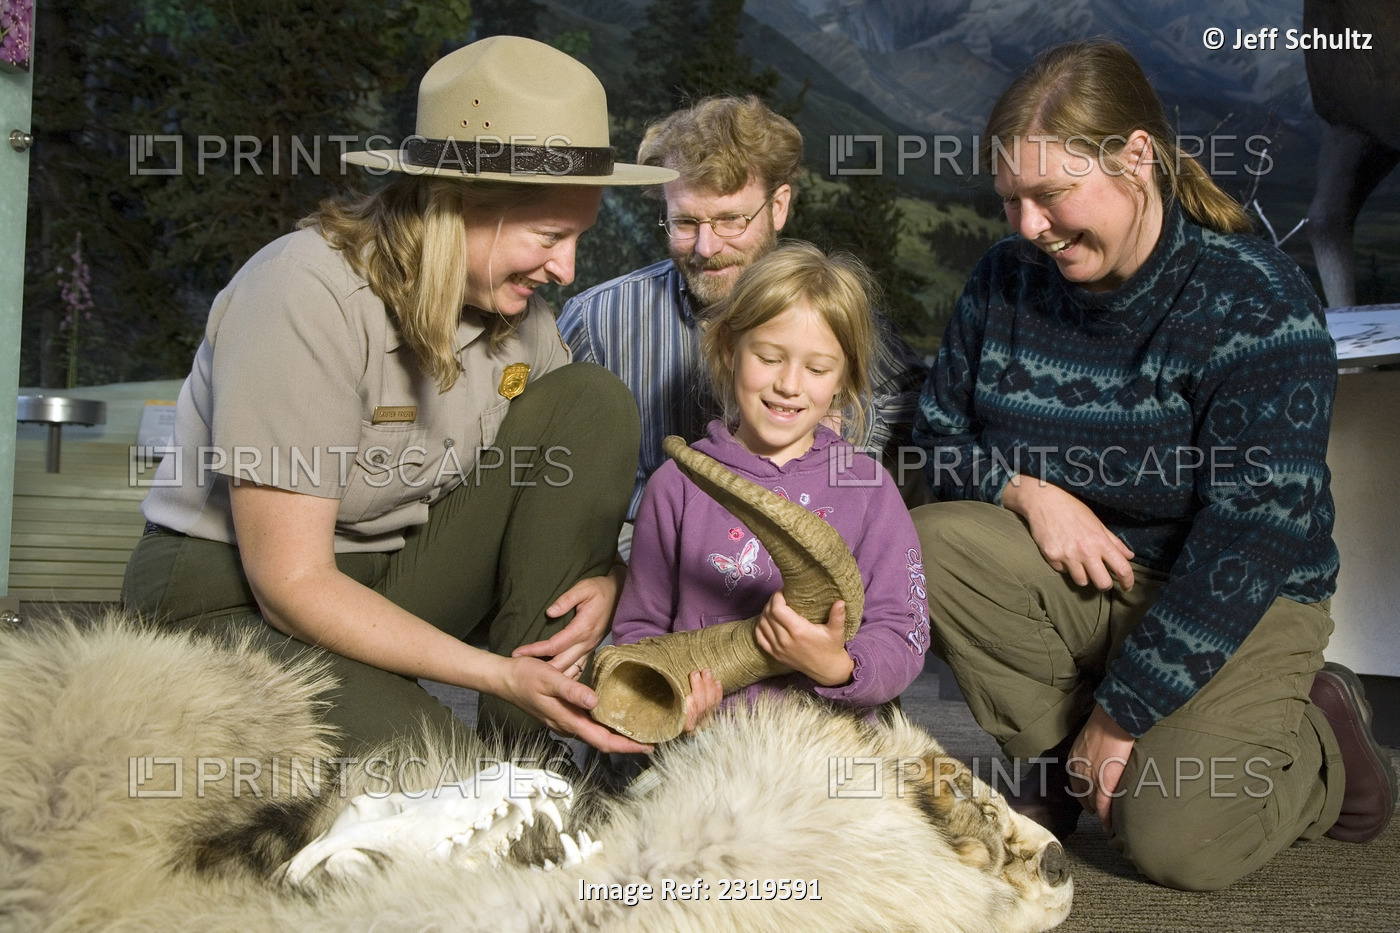 Female Us Interpretive Ranger Shows Animal Fur And Horn To A Visiting Family At ...